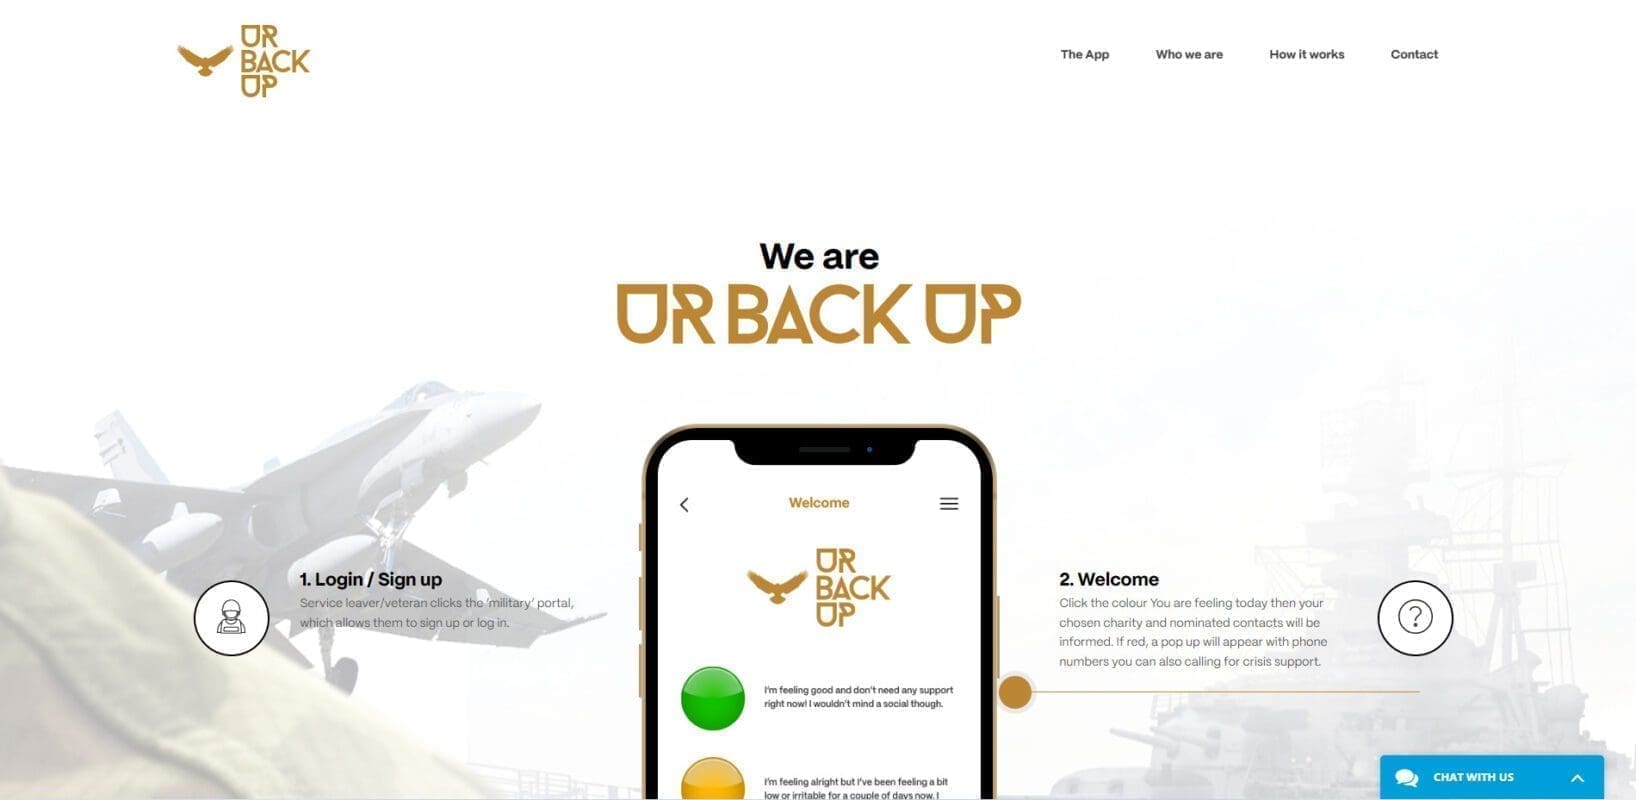 Military Wellbeing Website - Ur Back up